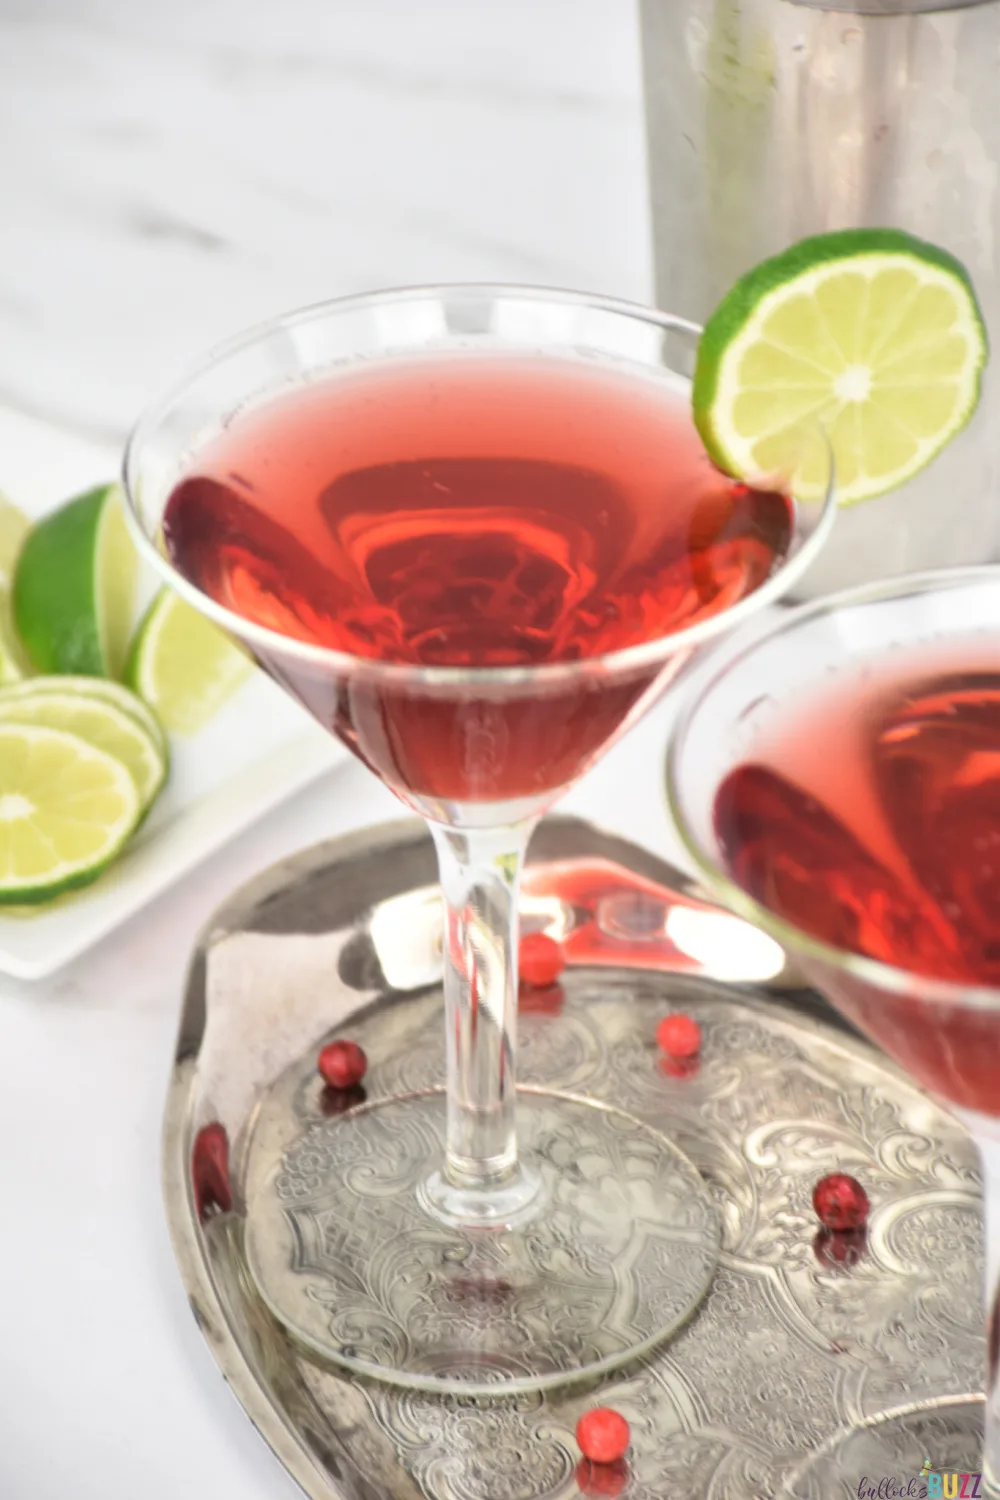 With a flavor profile that is bold and sweet, but also tart and sassy at the same time, the Scarkett O'Hara cocktail is deliciously refreshing!  #cocktails #recipes 